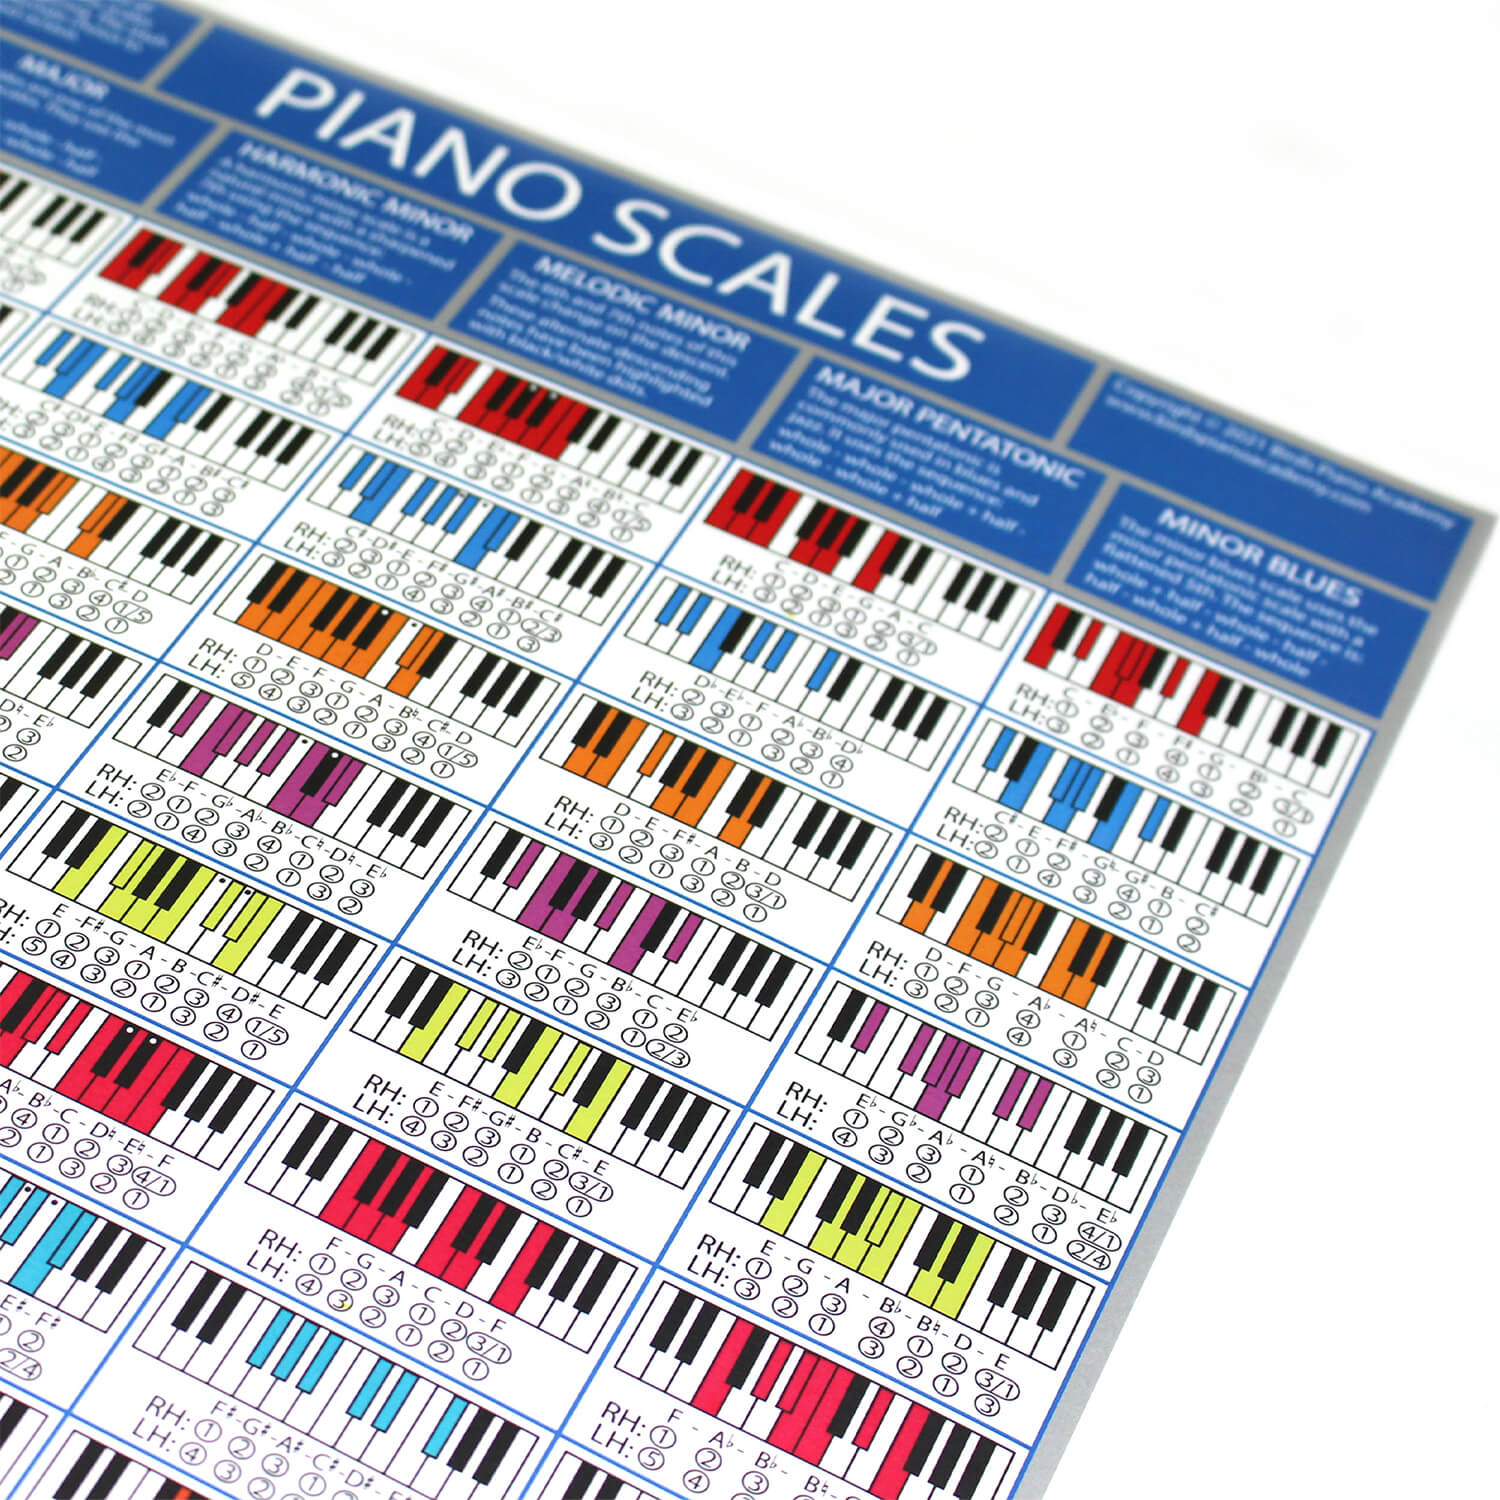 The Piano Scales Poster